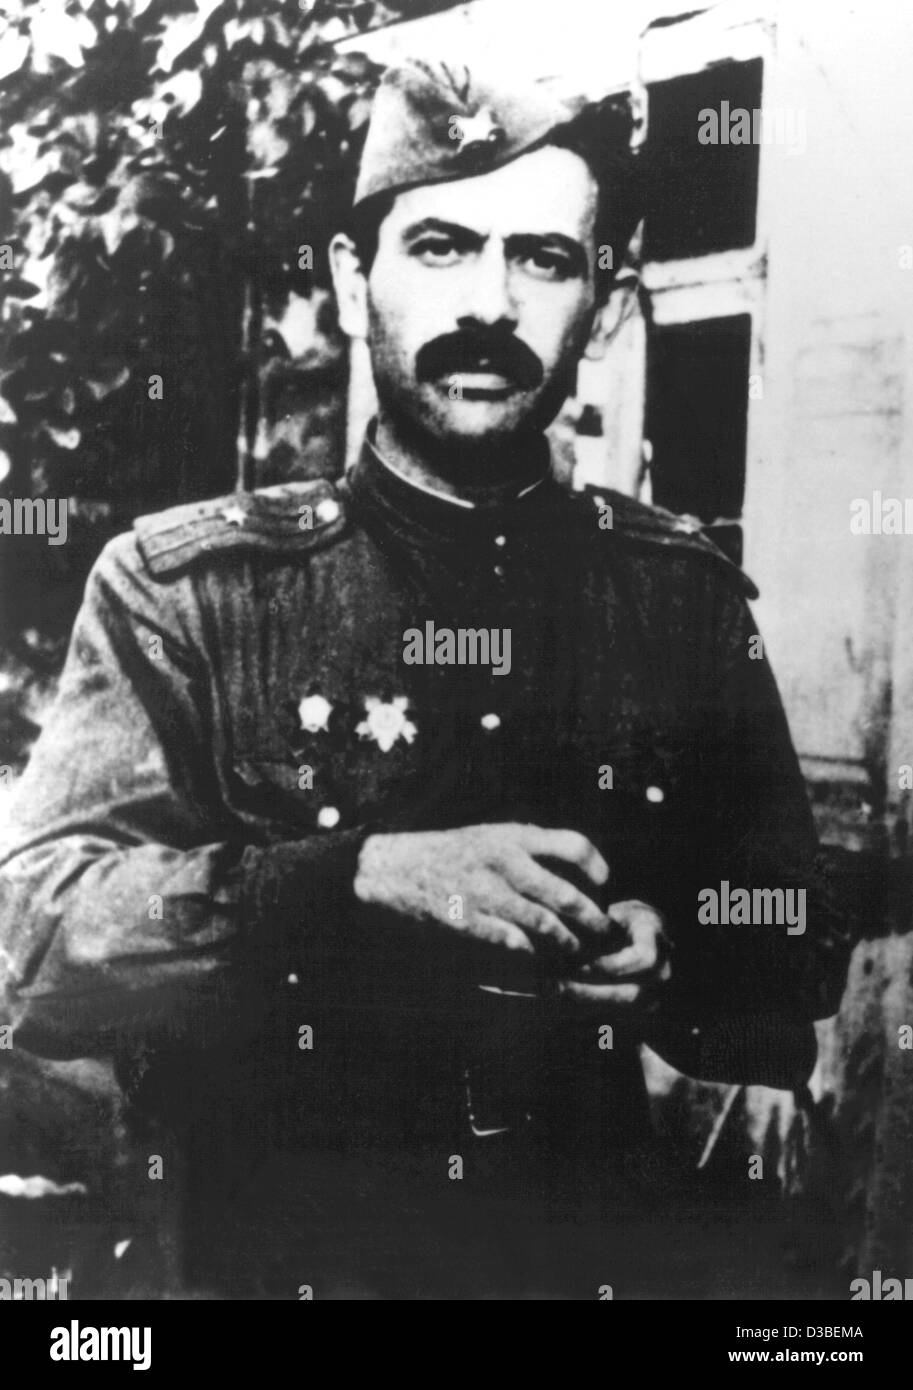 (dpa files) - Russian author and civil rights activist Lev Kopelev pictured here as a Soviet major in 1945. The dissident author was expatriated from the former Soviet Union in 1981 and has since lived in West Germany. Even after his rehabilitation in 1990 Kopelev decided to stay in Germany for prof Stock Photo